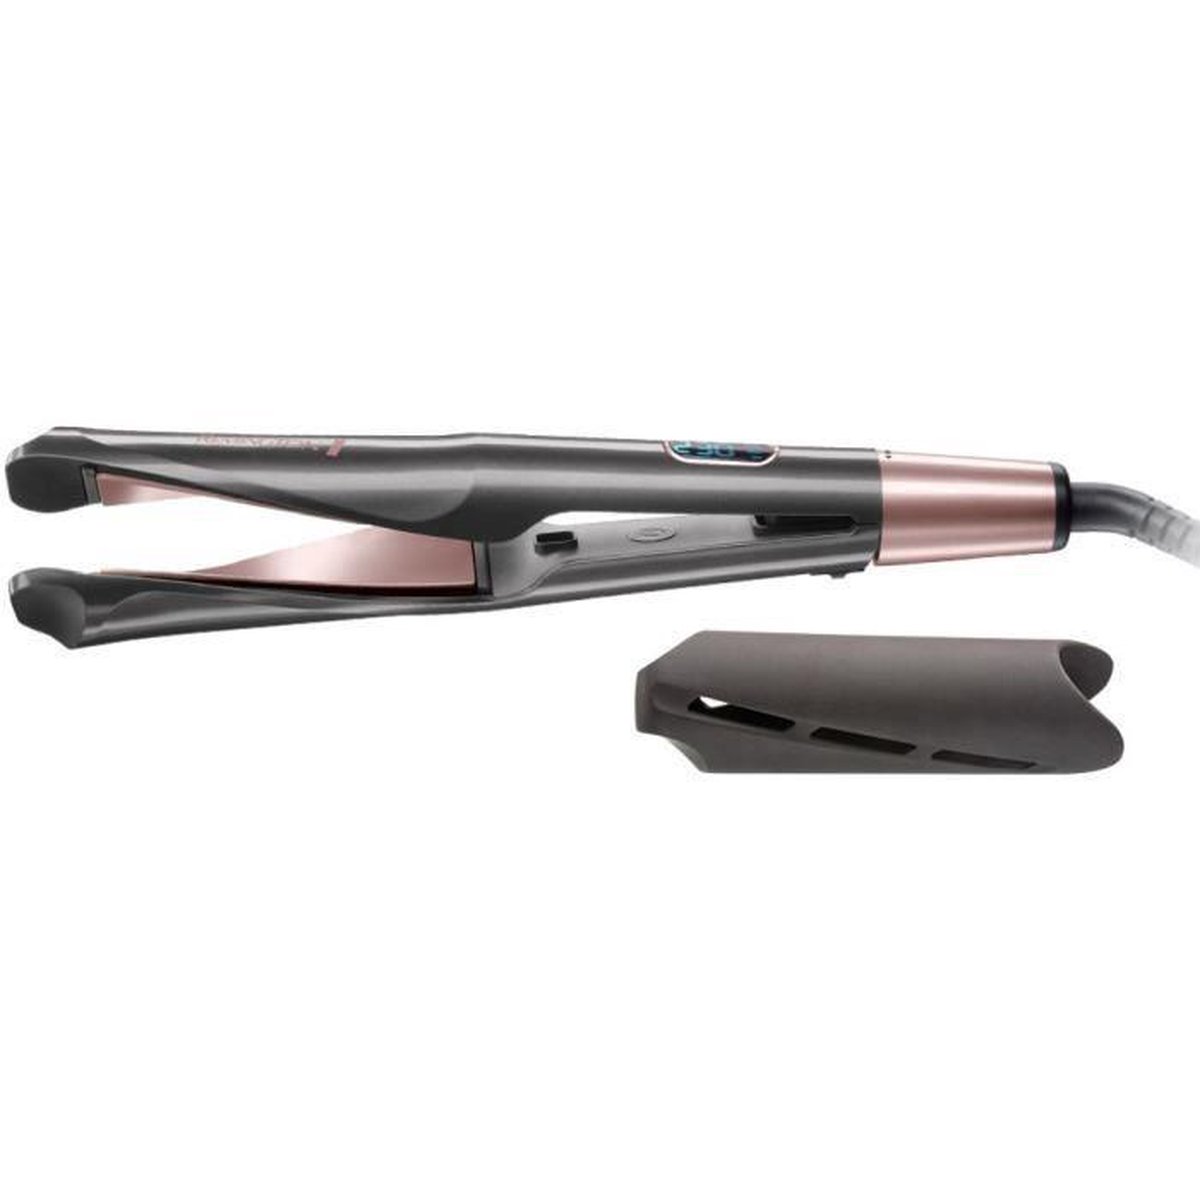 Curl Straight | S6606 Remington Confidence - & Stijltang bol 2-in-1